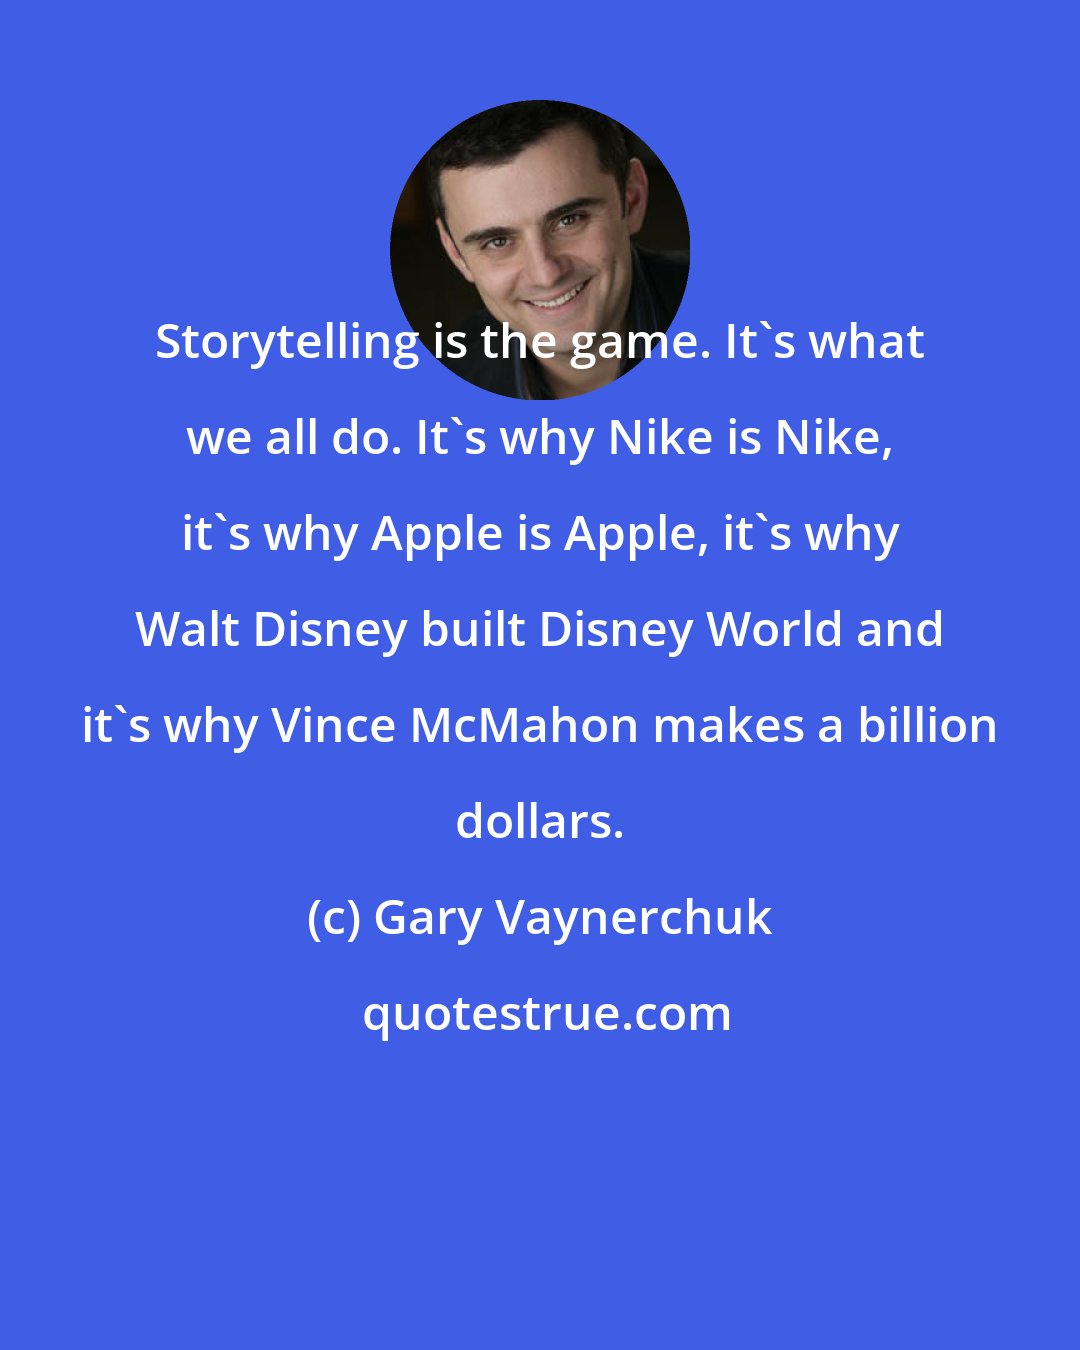 Gary Vaynerchuk: Storytelling is the game. It's what we all do. It's why Nike is Nike, it's why Apple is Apple, it's why Walt Disney built Disney World and it's why Vince McMahon makes a billion dollars.